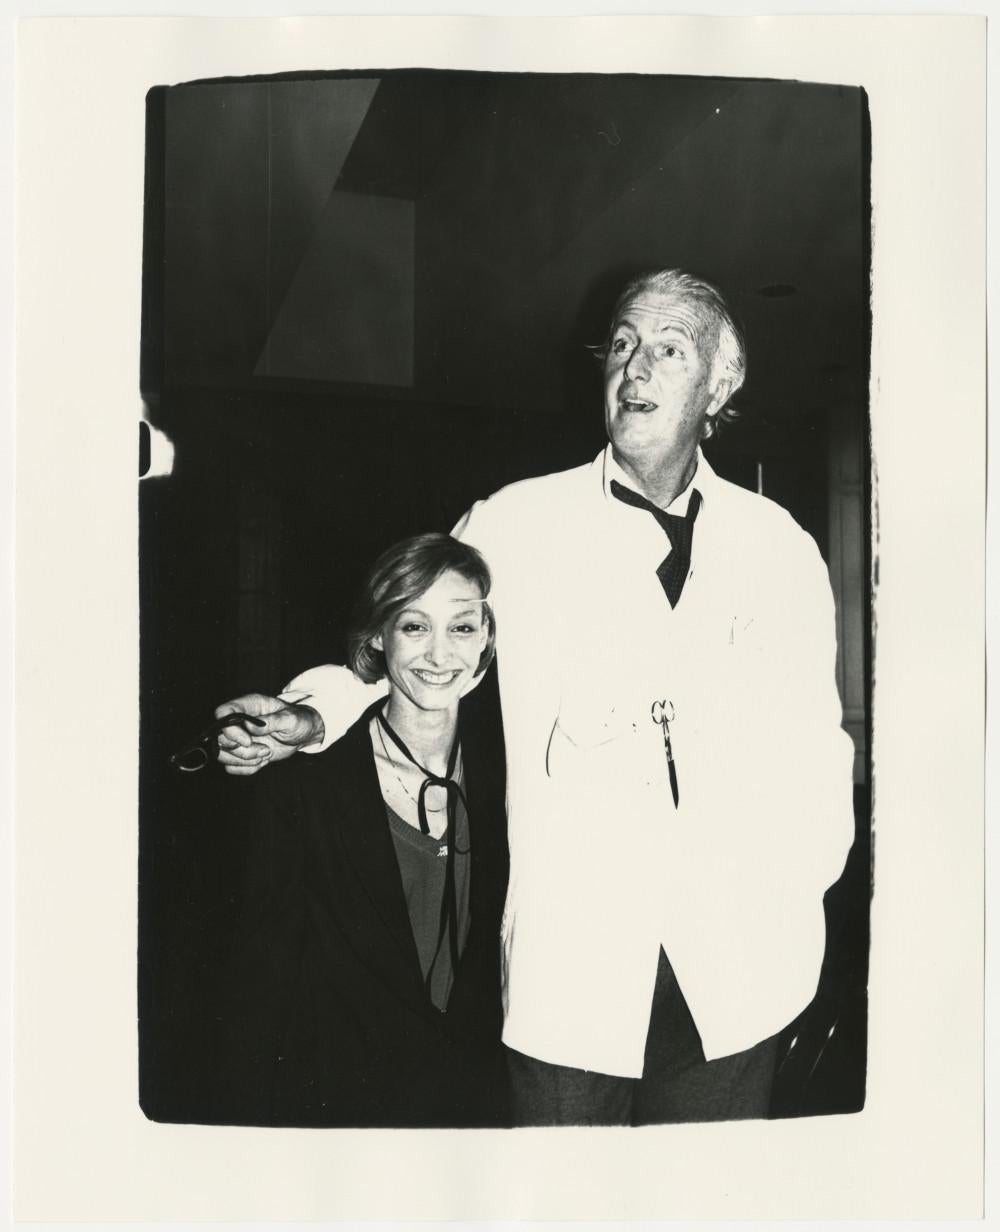 Andy Warhol Portrait Photograph - Hubert de Givenchy and Unidentified Woman